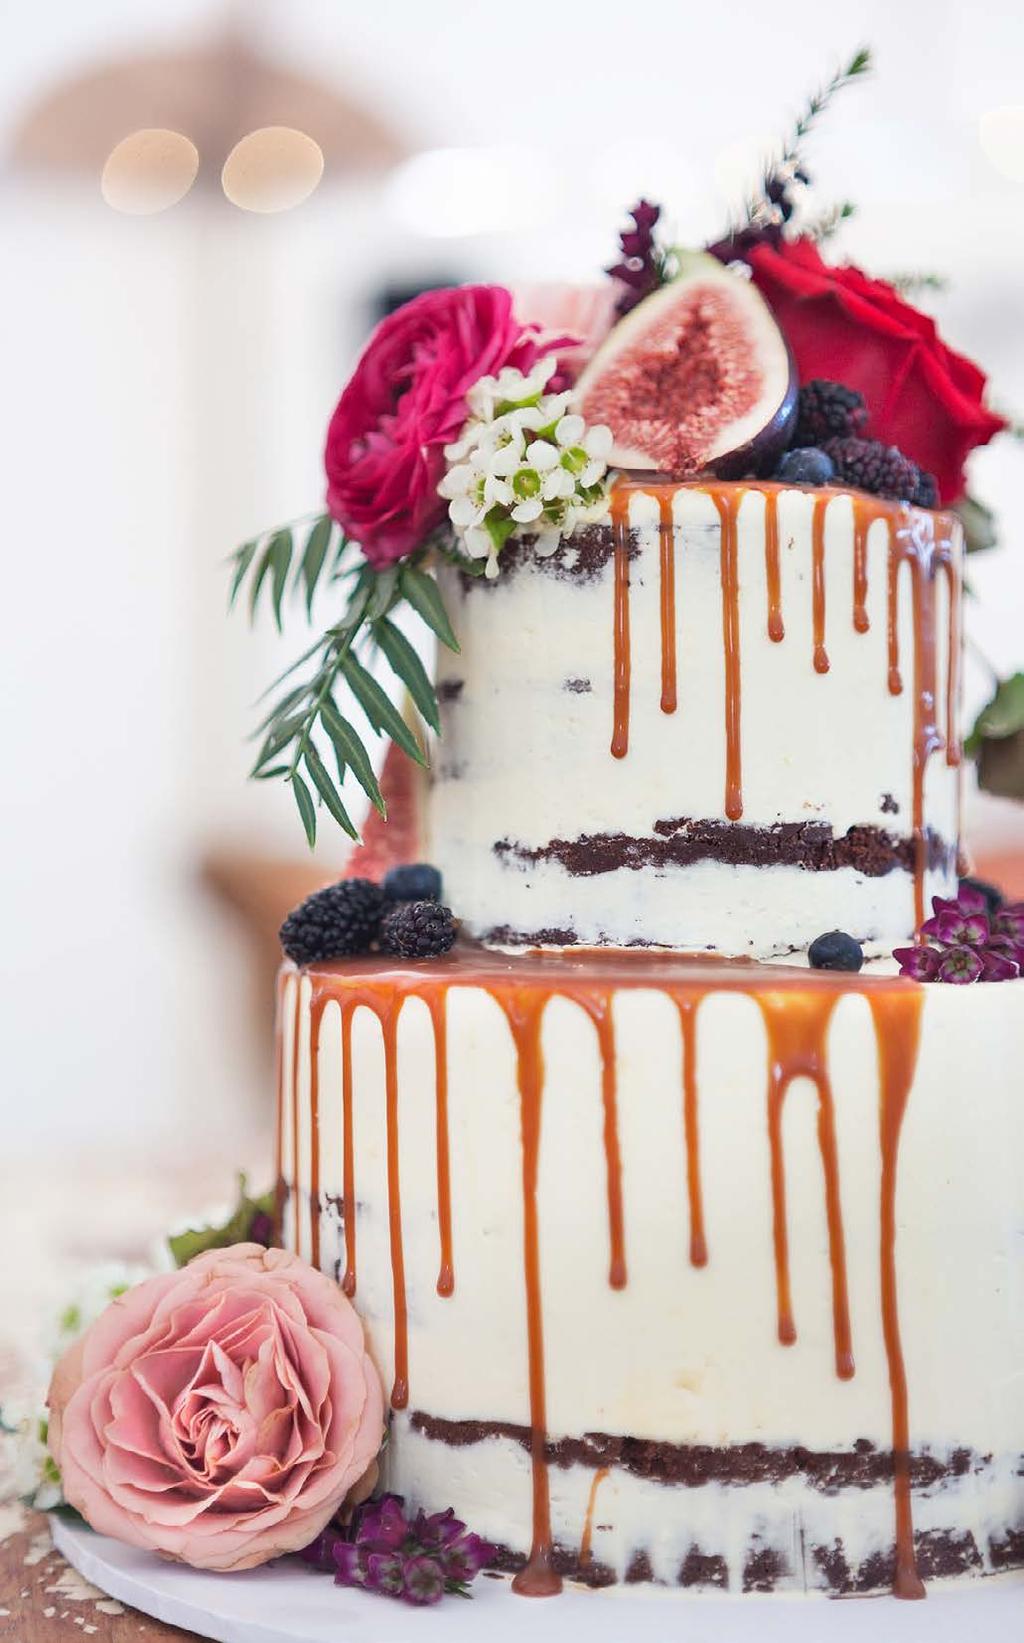 BYO Wedding Cakes Cakeage $5 pp served as dessert or $3pp served as dessert canapé Harvest Cakes @ $12 pp Harvest creates beautiful tiered cakes for birthdays and special occasions served with